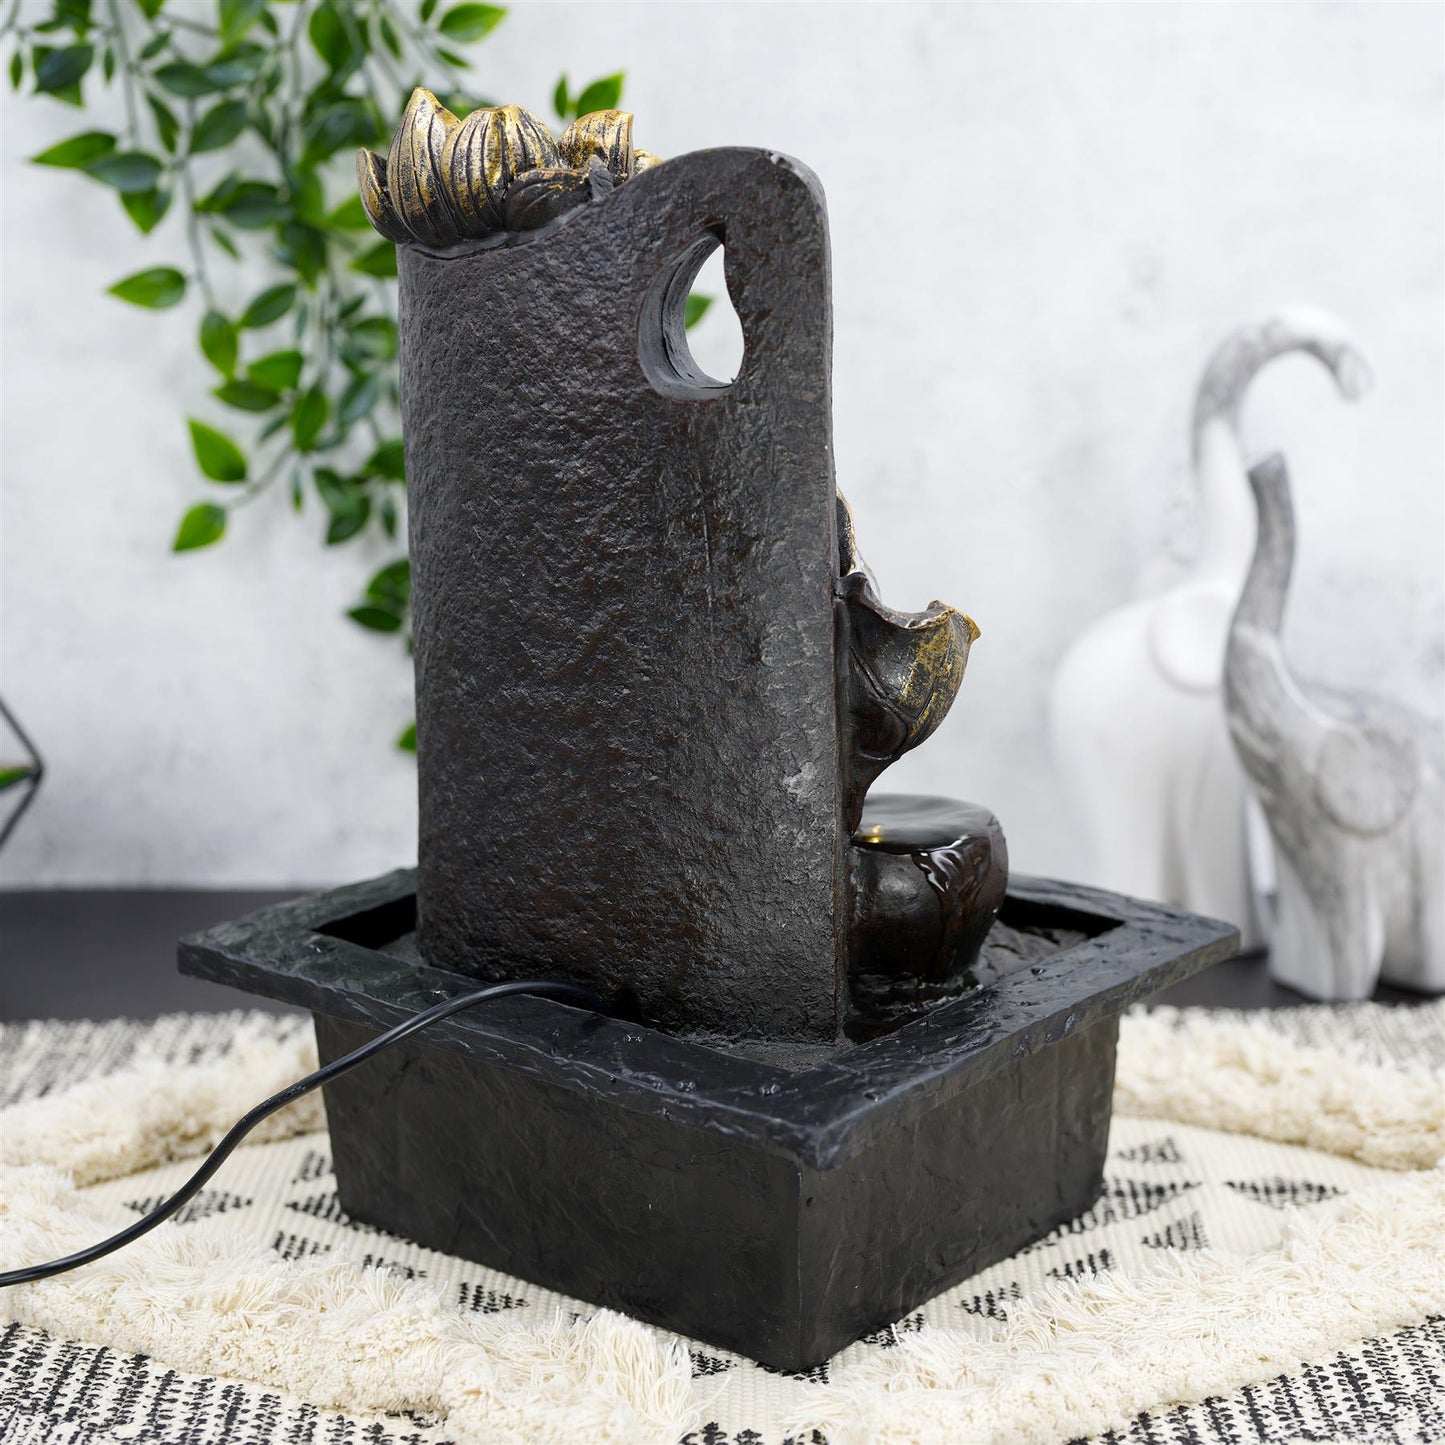 Buddha  Water Feature Led Lights by GEEZY - UKBuyZone